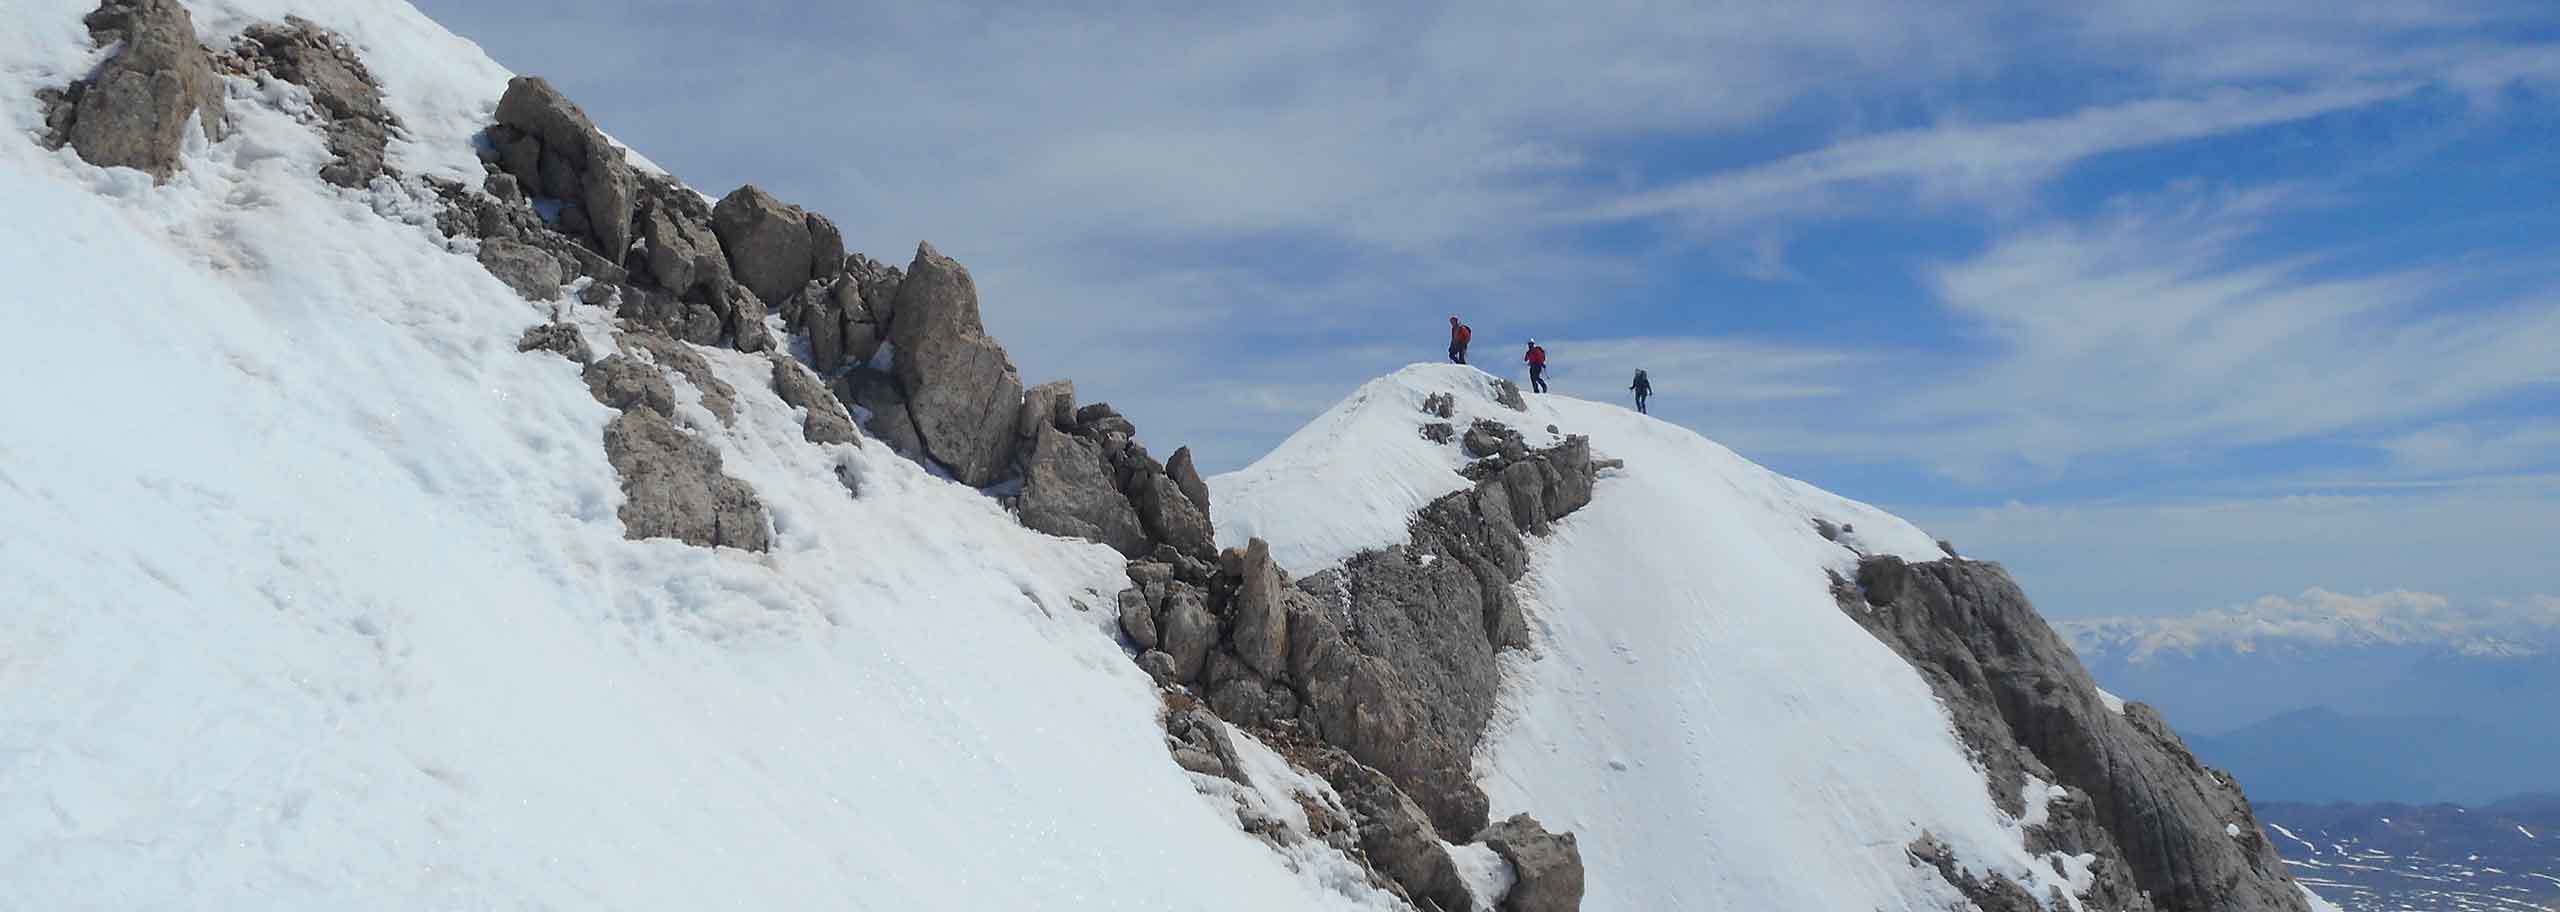 Ski Mountaineering in Gran Sasso with a Mountain Guide